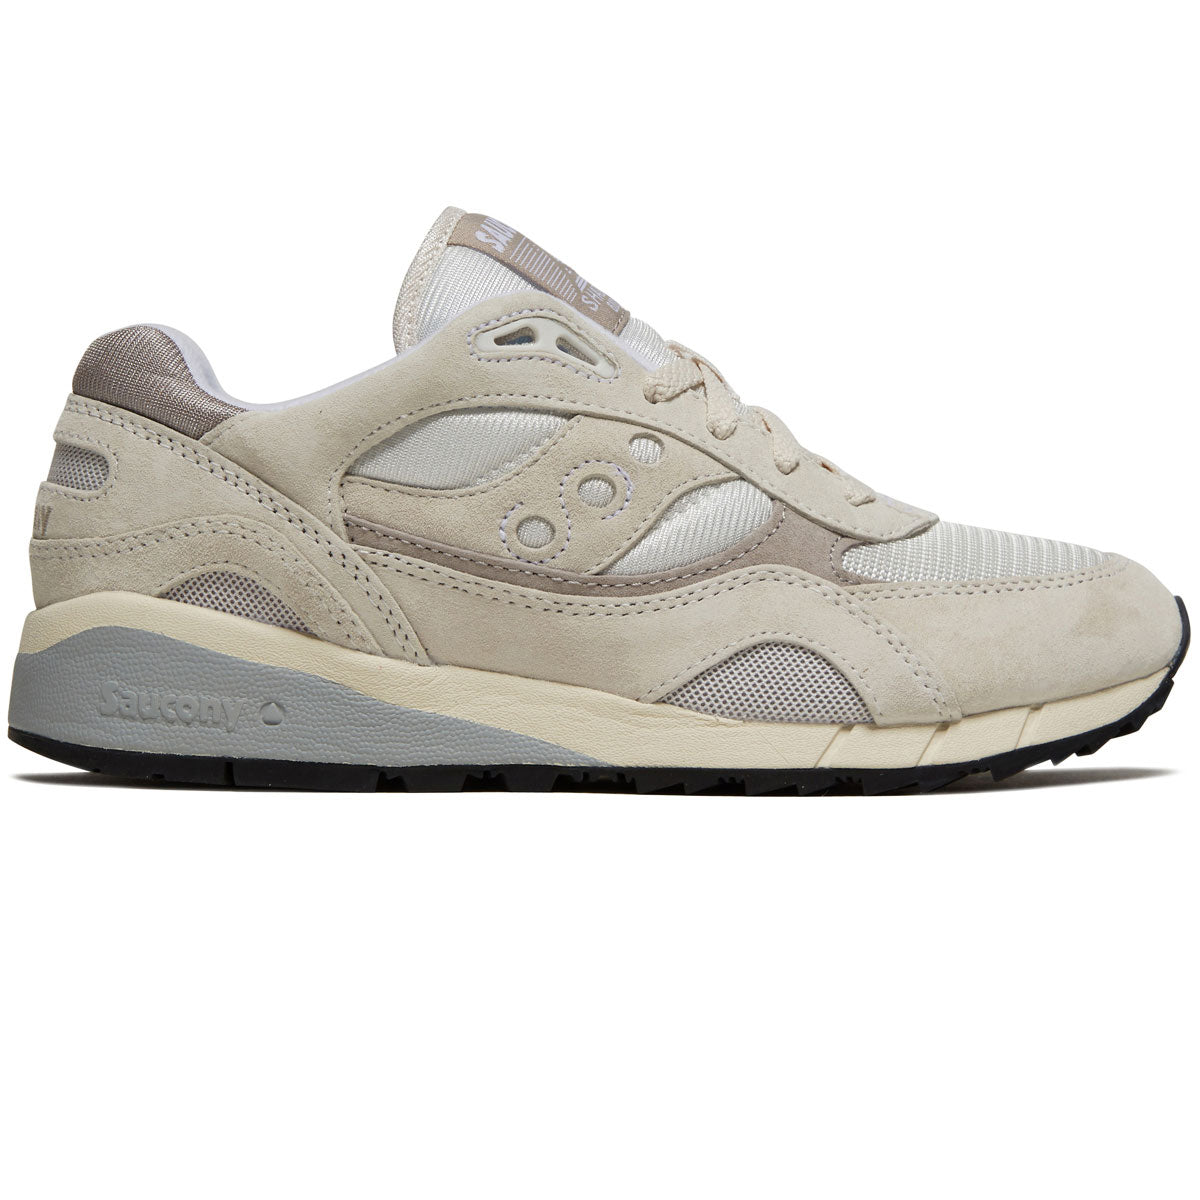 Saucony Shadow 6000 Shoes - White/Grey image 1